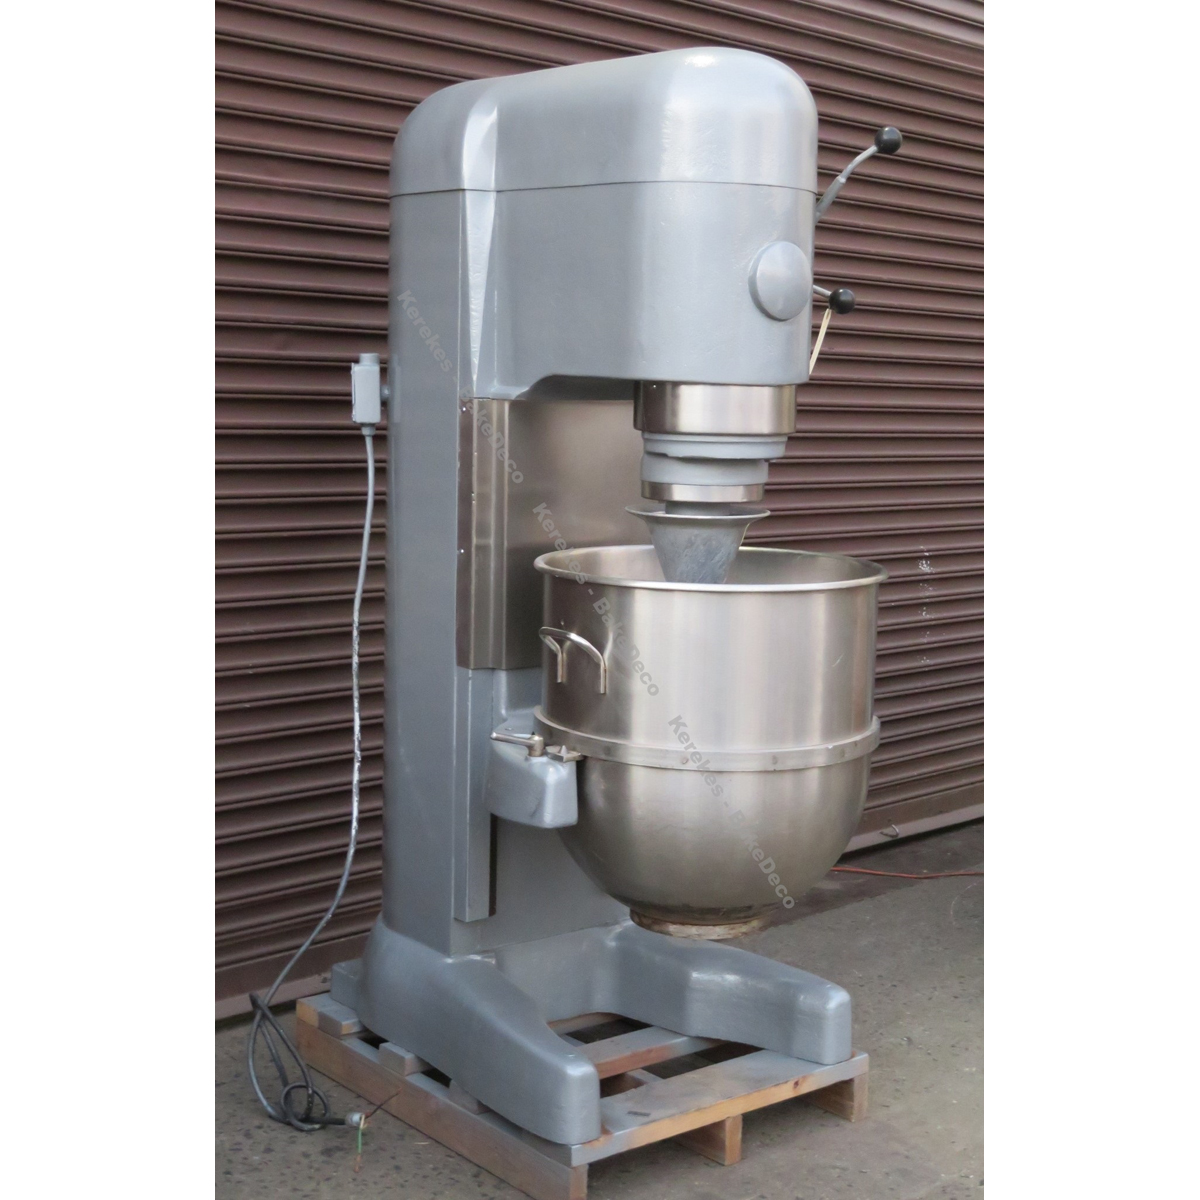 Hobart 140 Quart V1401 Mixer with Bowl, Used Great Condition image 3